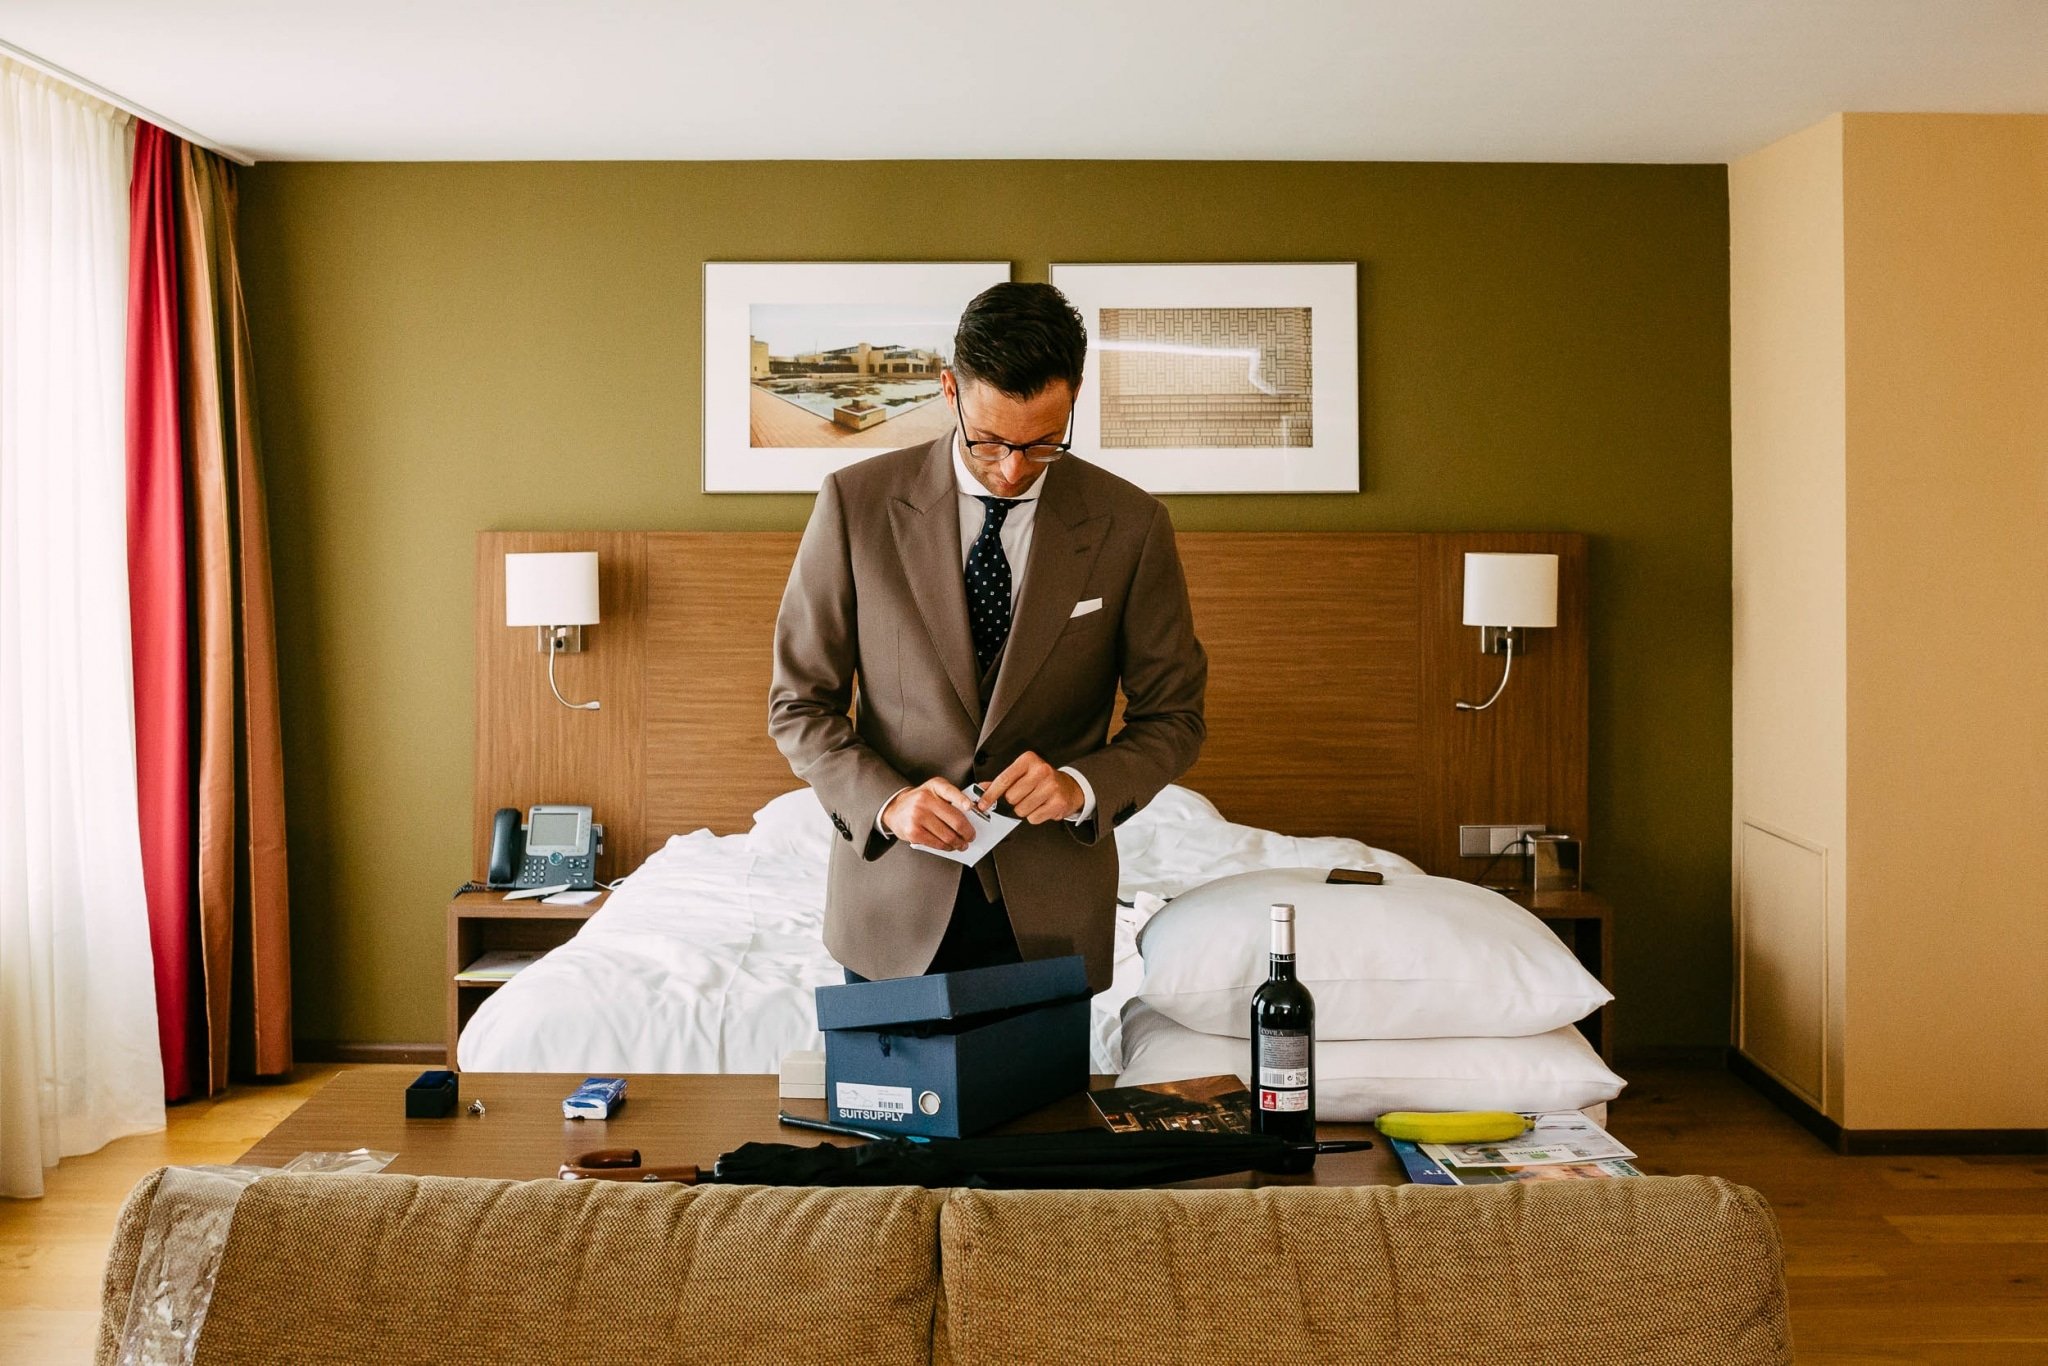 A man in a suit stands next to a bed in a hotel room.